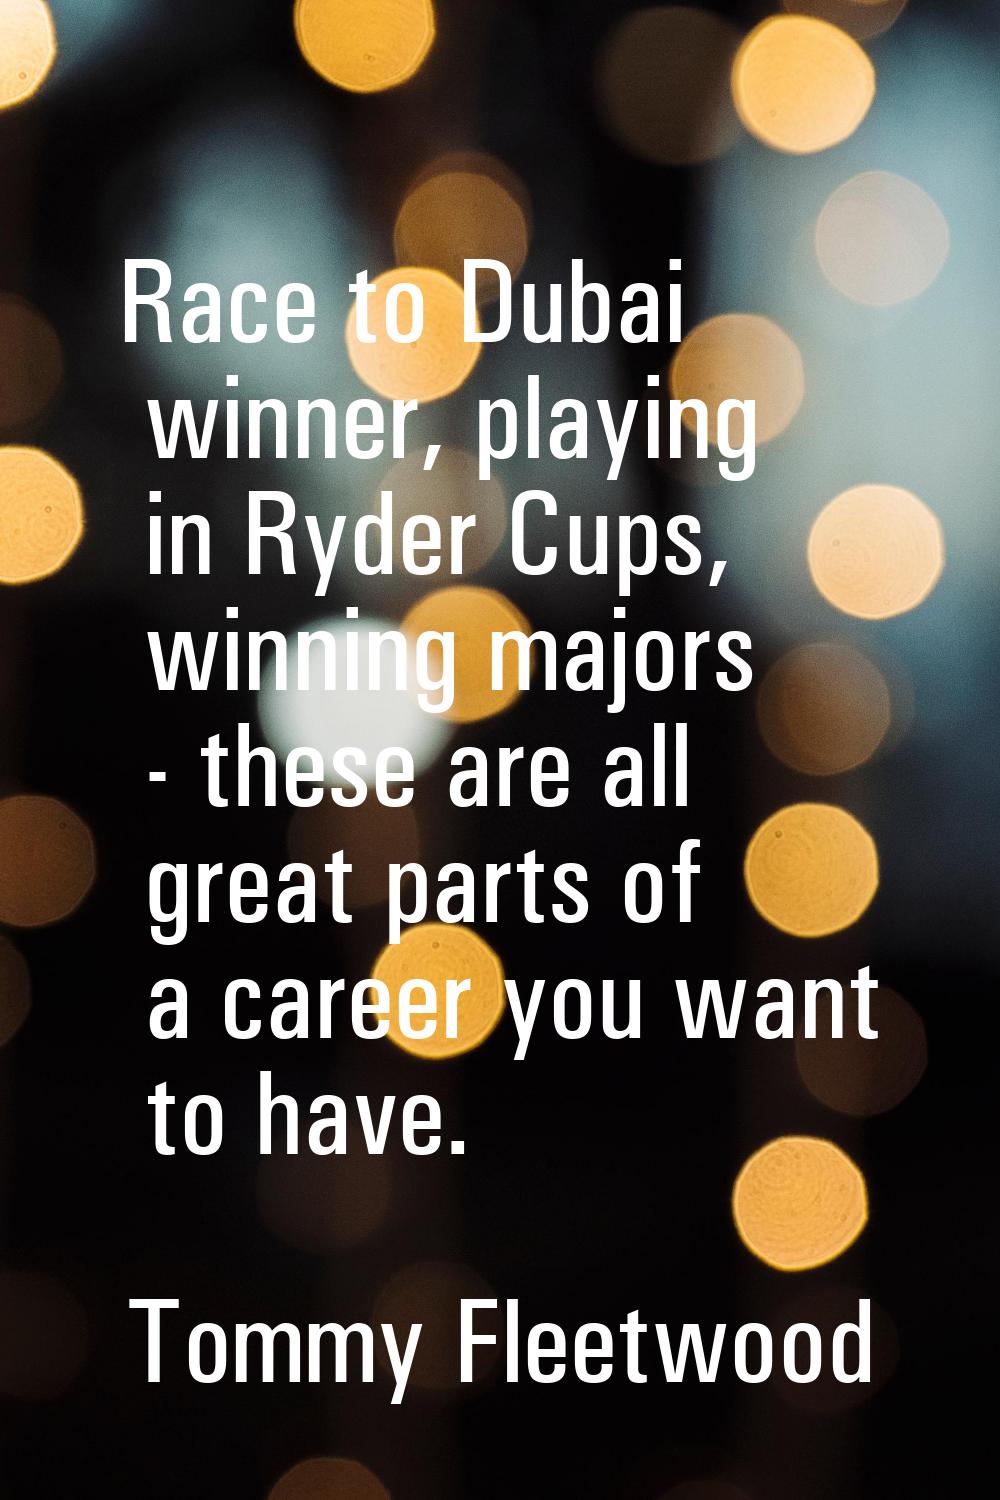 Race to Dubai winner, playing in Ryder Cups, winning majors - these are all great parts of a career